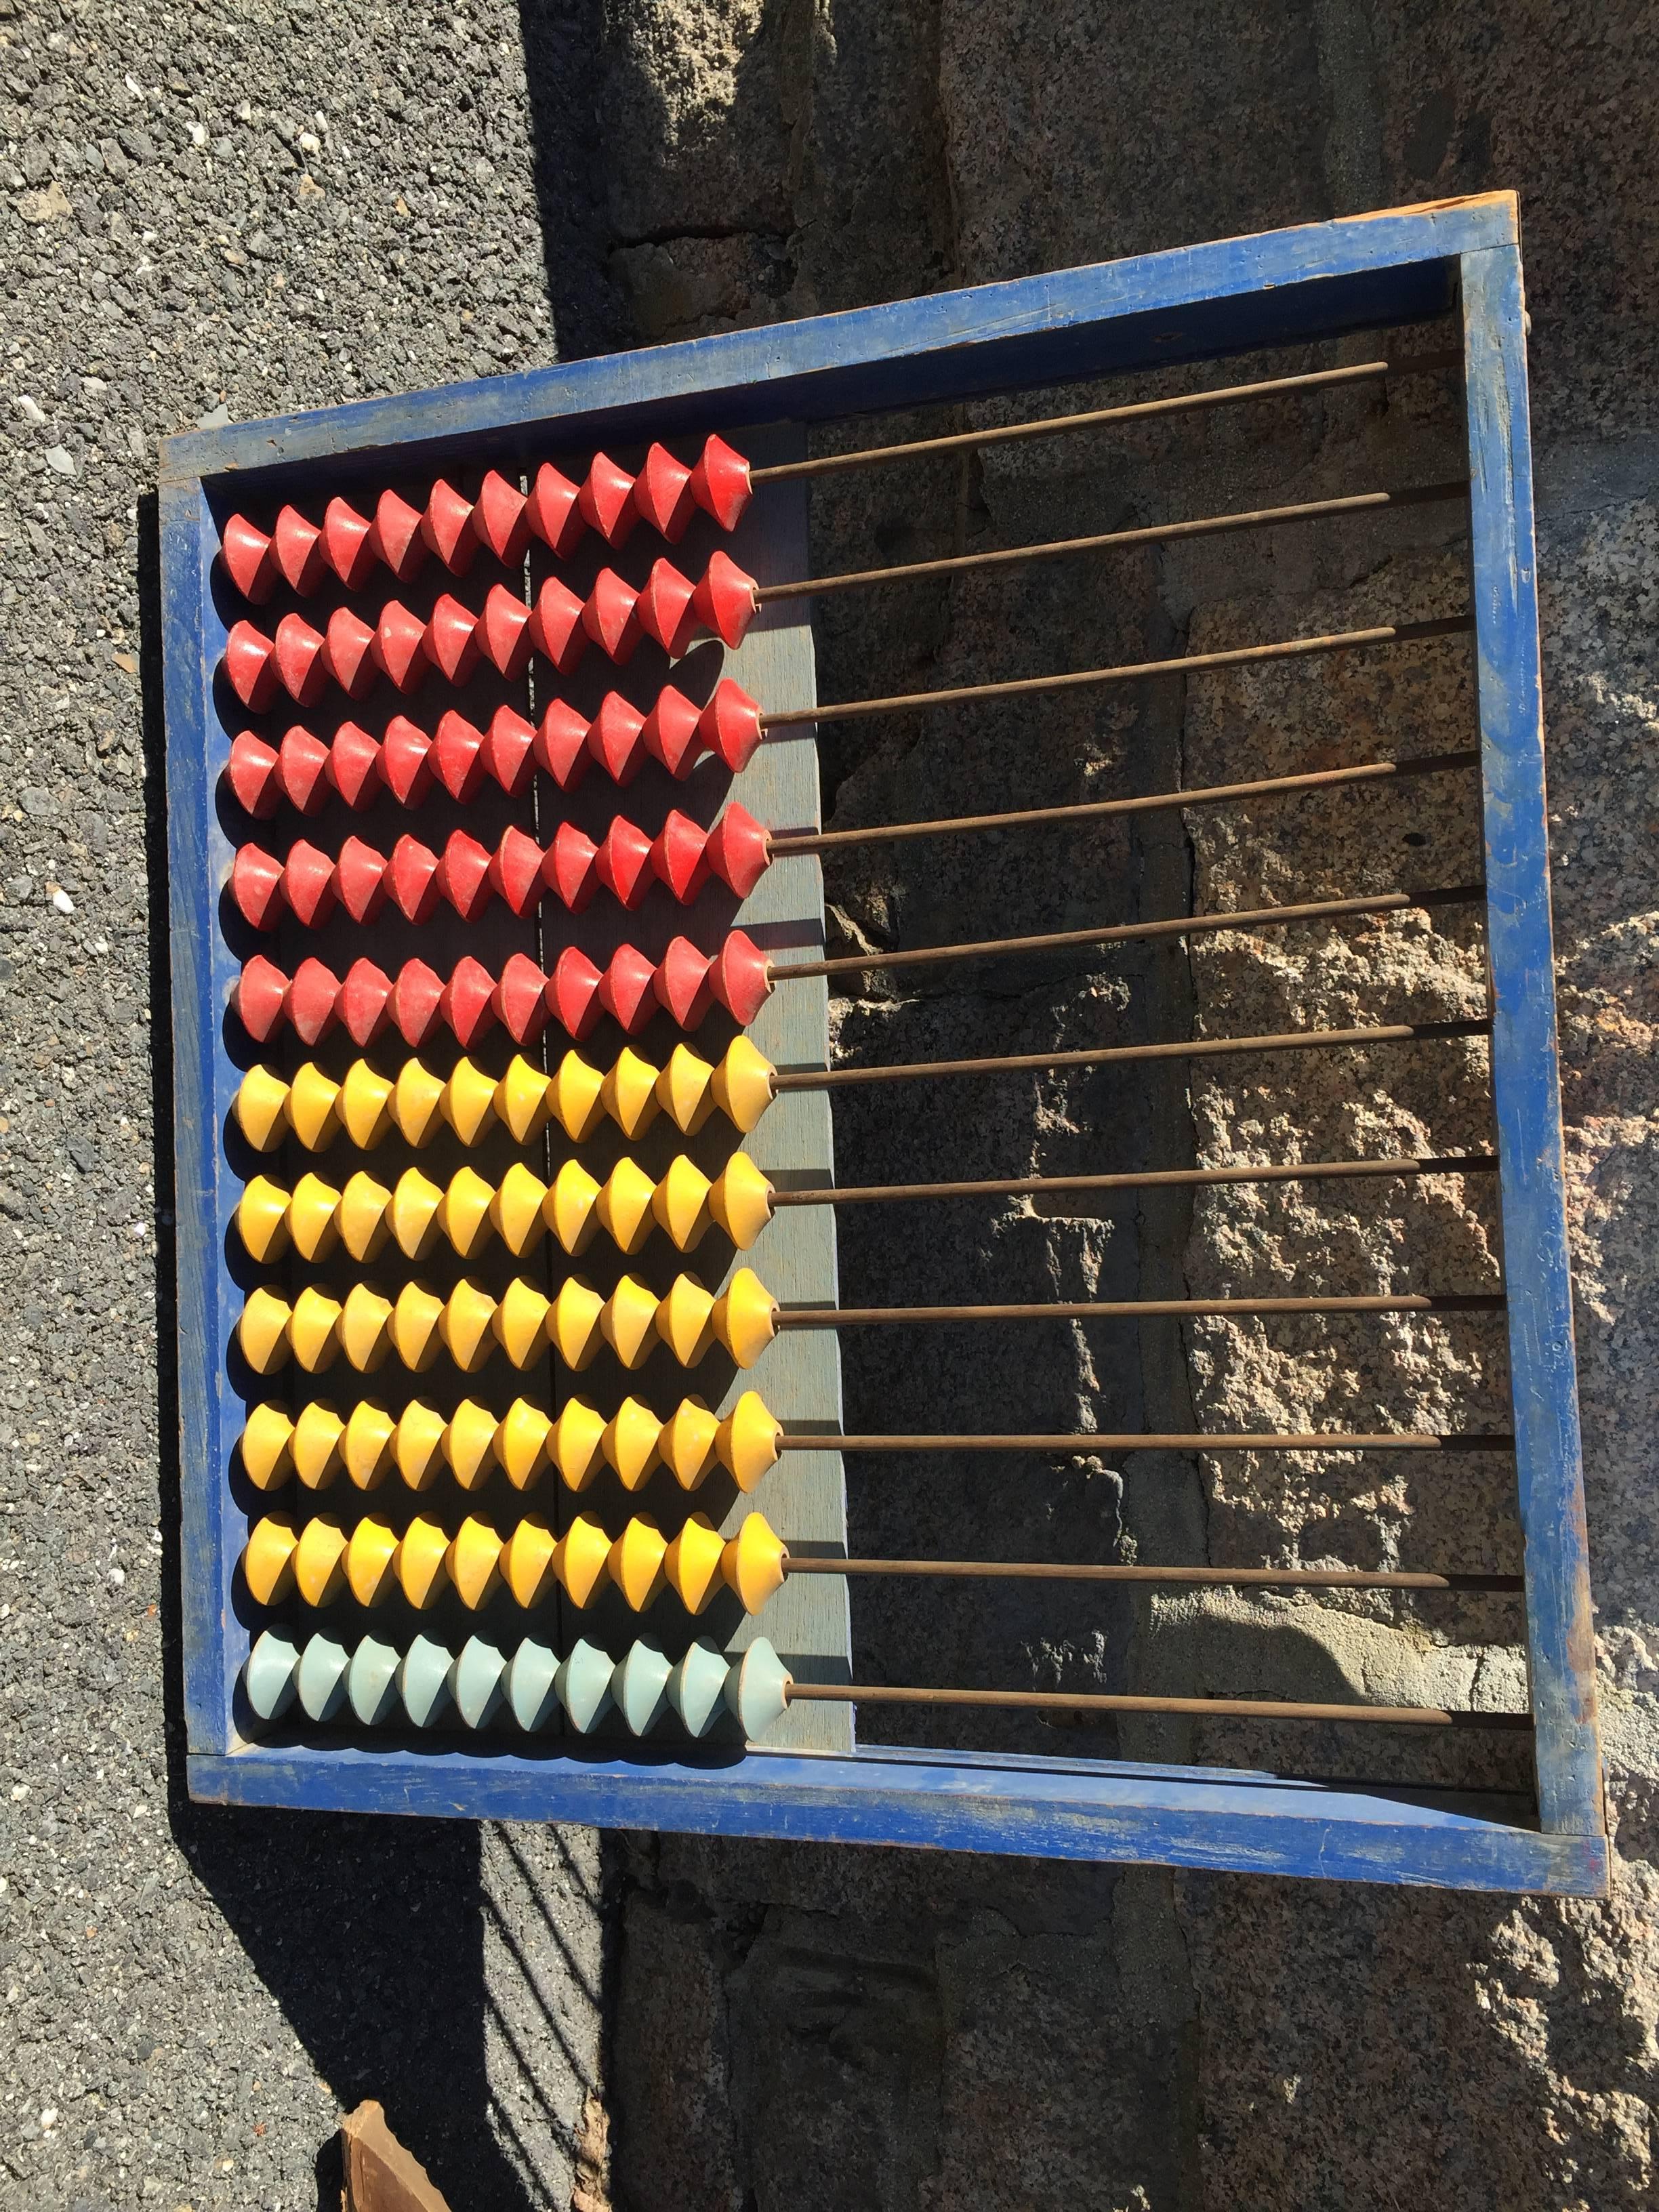 A colorful hand made children's school antique abacus Soroban from old Japan, 1950s in brilliant red, blue and yellow colors. Mount it on your wall or use it to teach with- it still works!

Dimensions: 24 inches high and 25 inches wide.

Includes